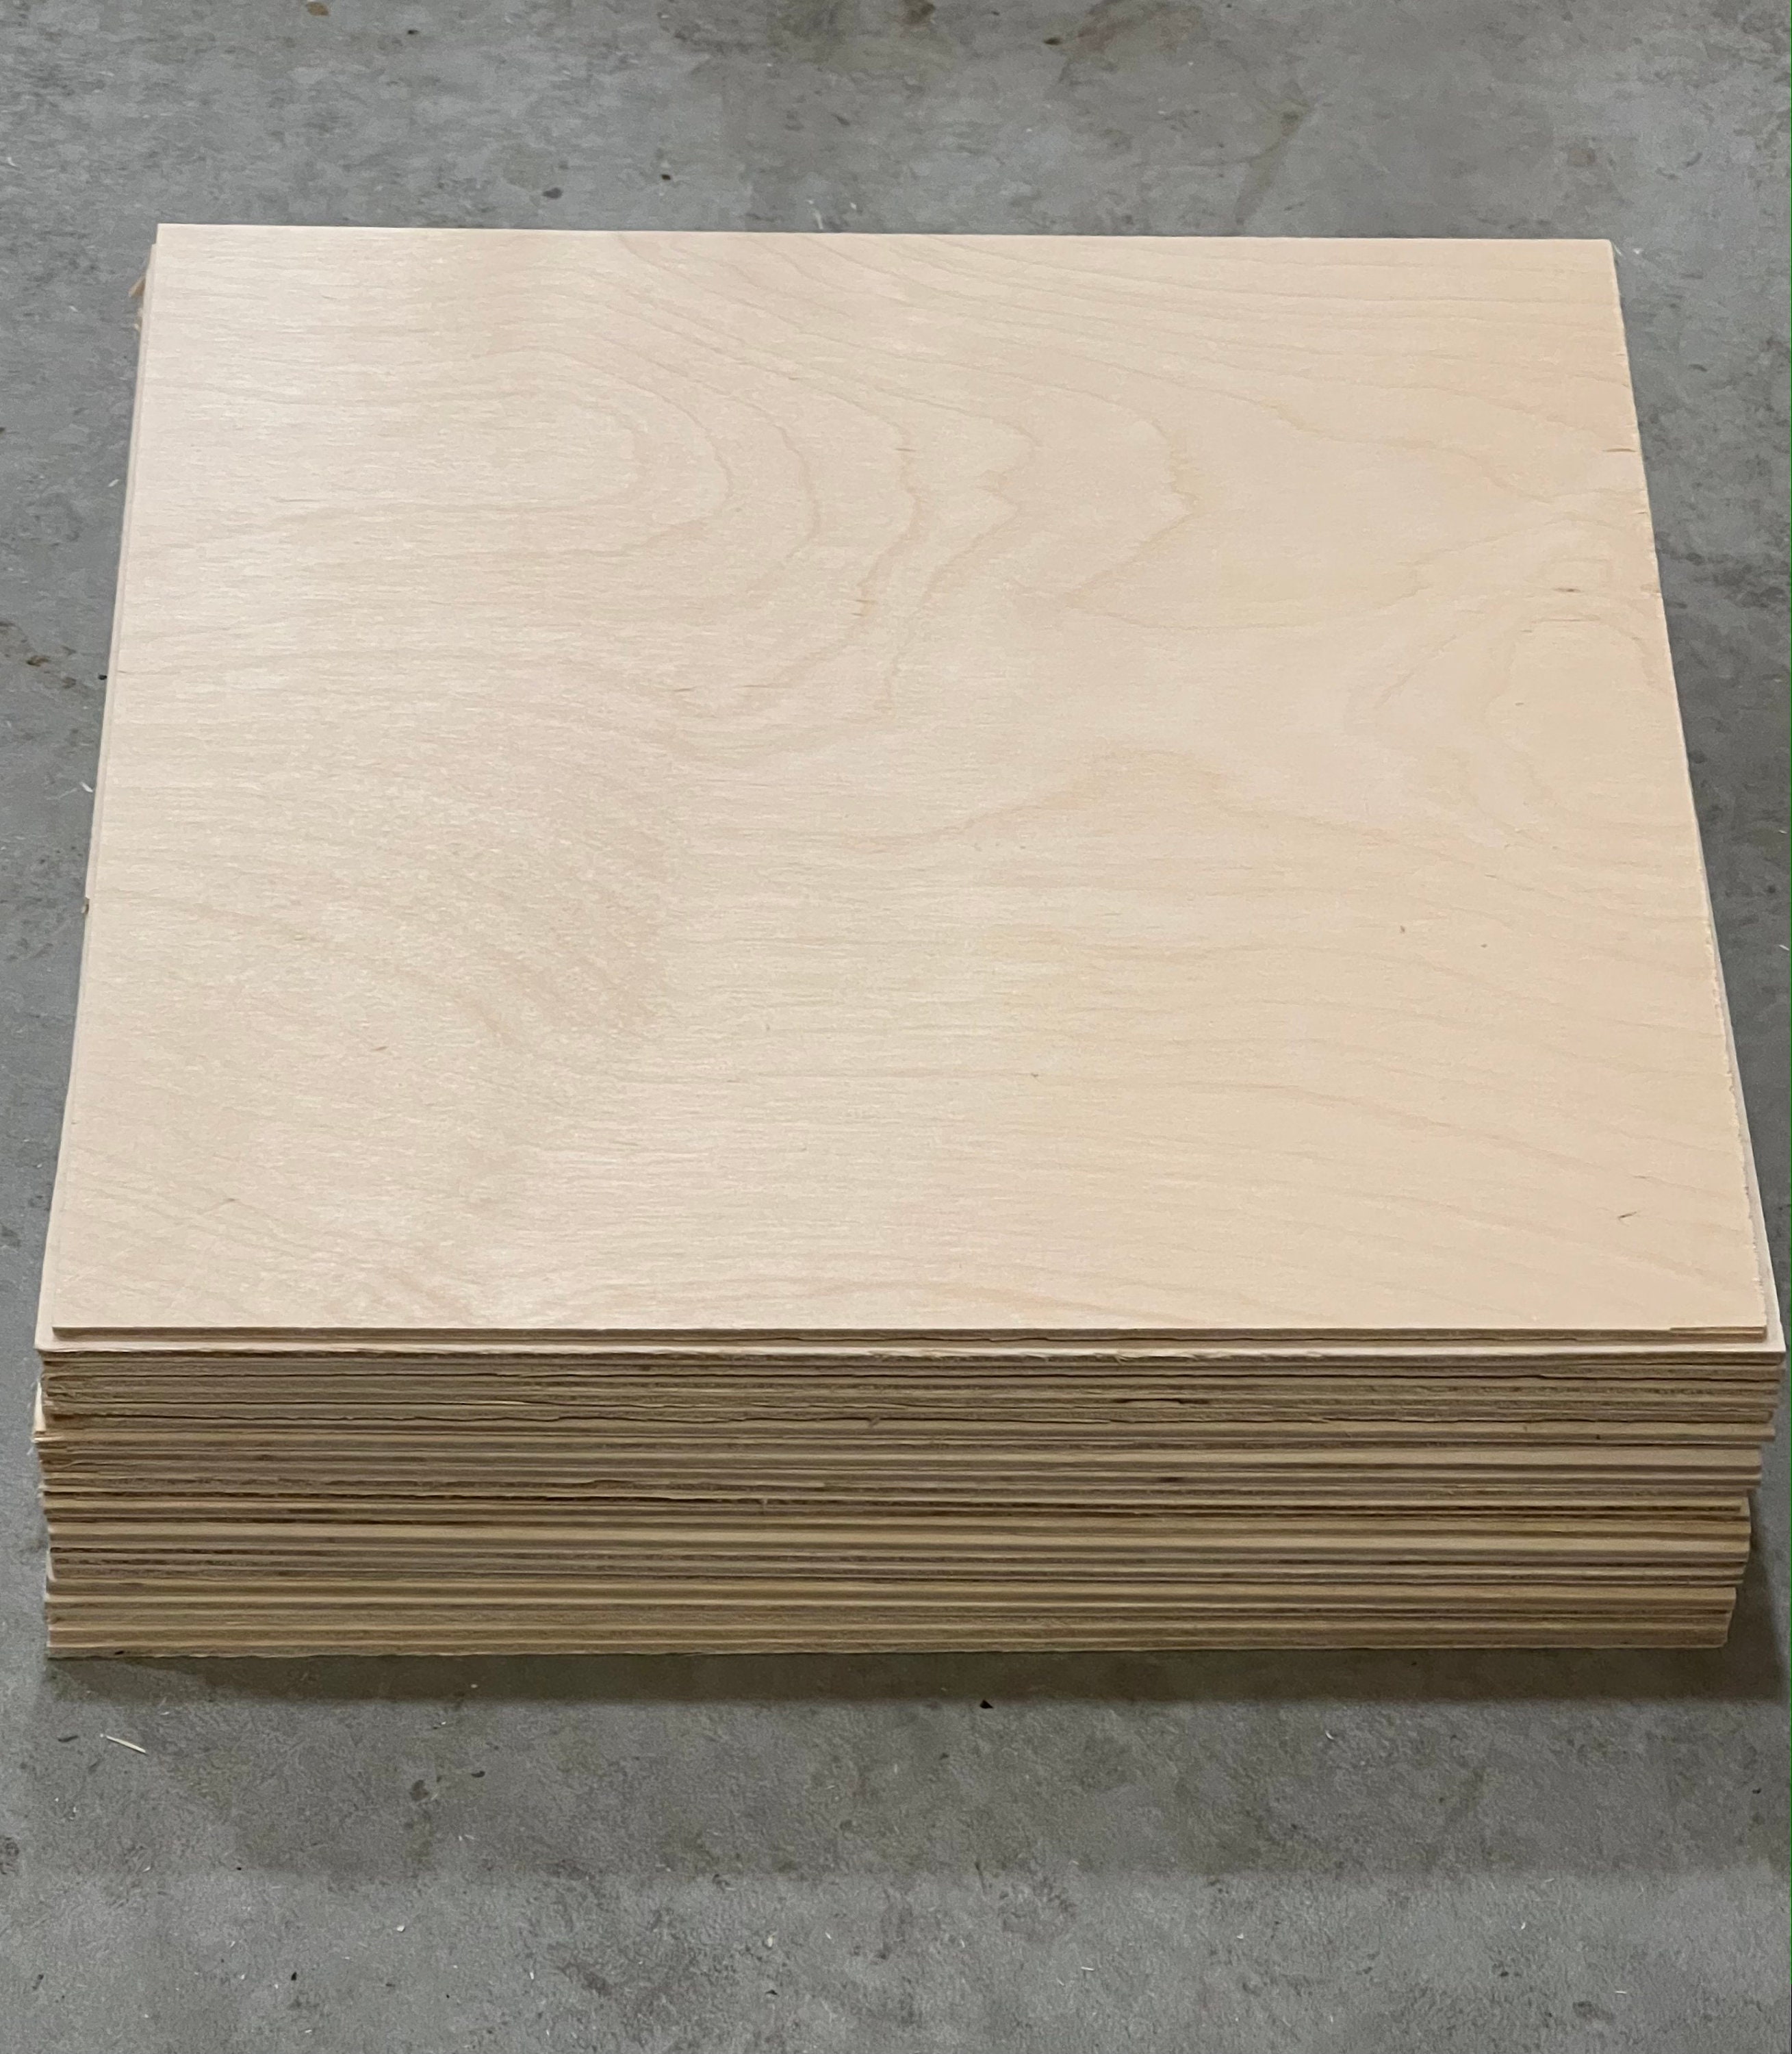 1/8 Laser Wood Sample Pack, 3mm Glowforge Wood Sheets, Unfinished Plywood  for Laser Cutting and Engraving, CNC Laser Ready Materials 